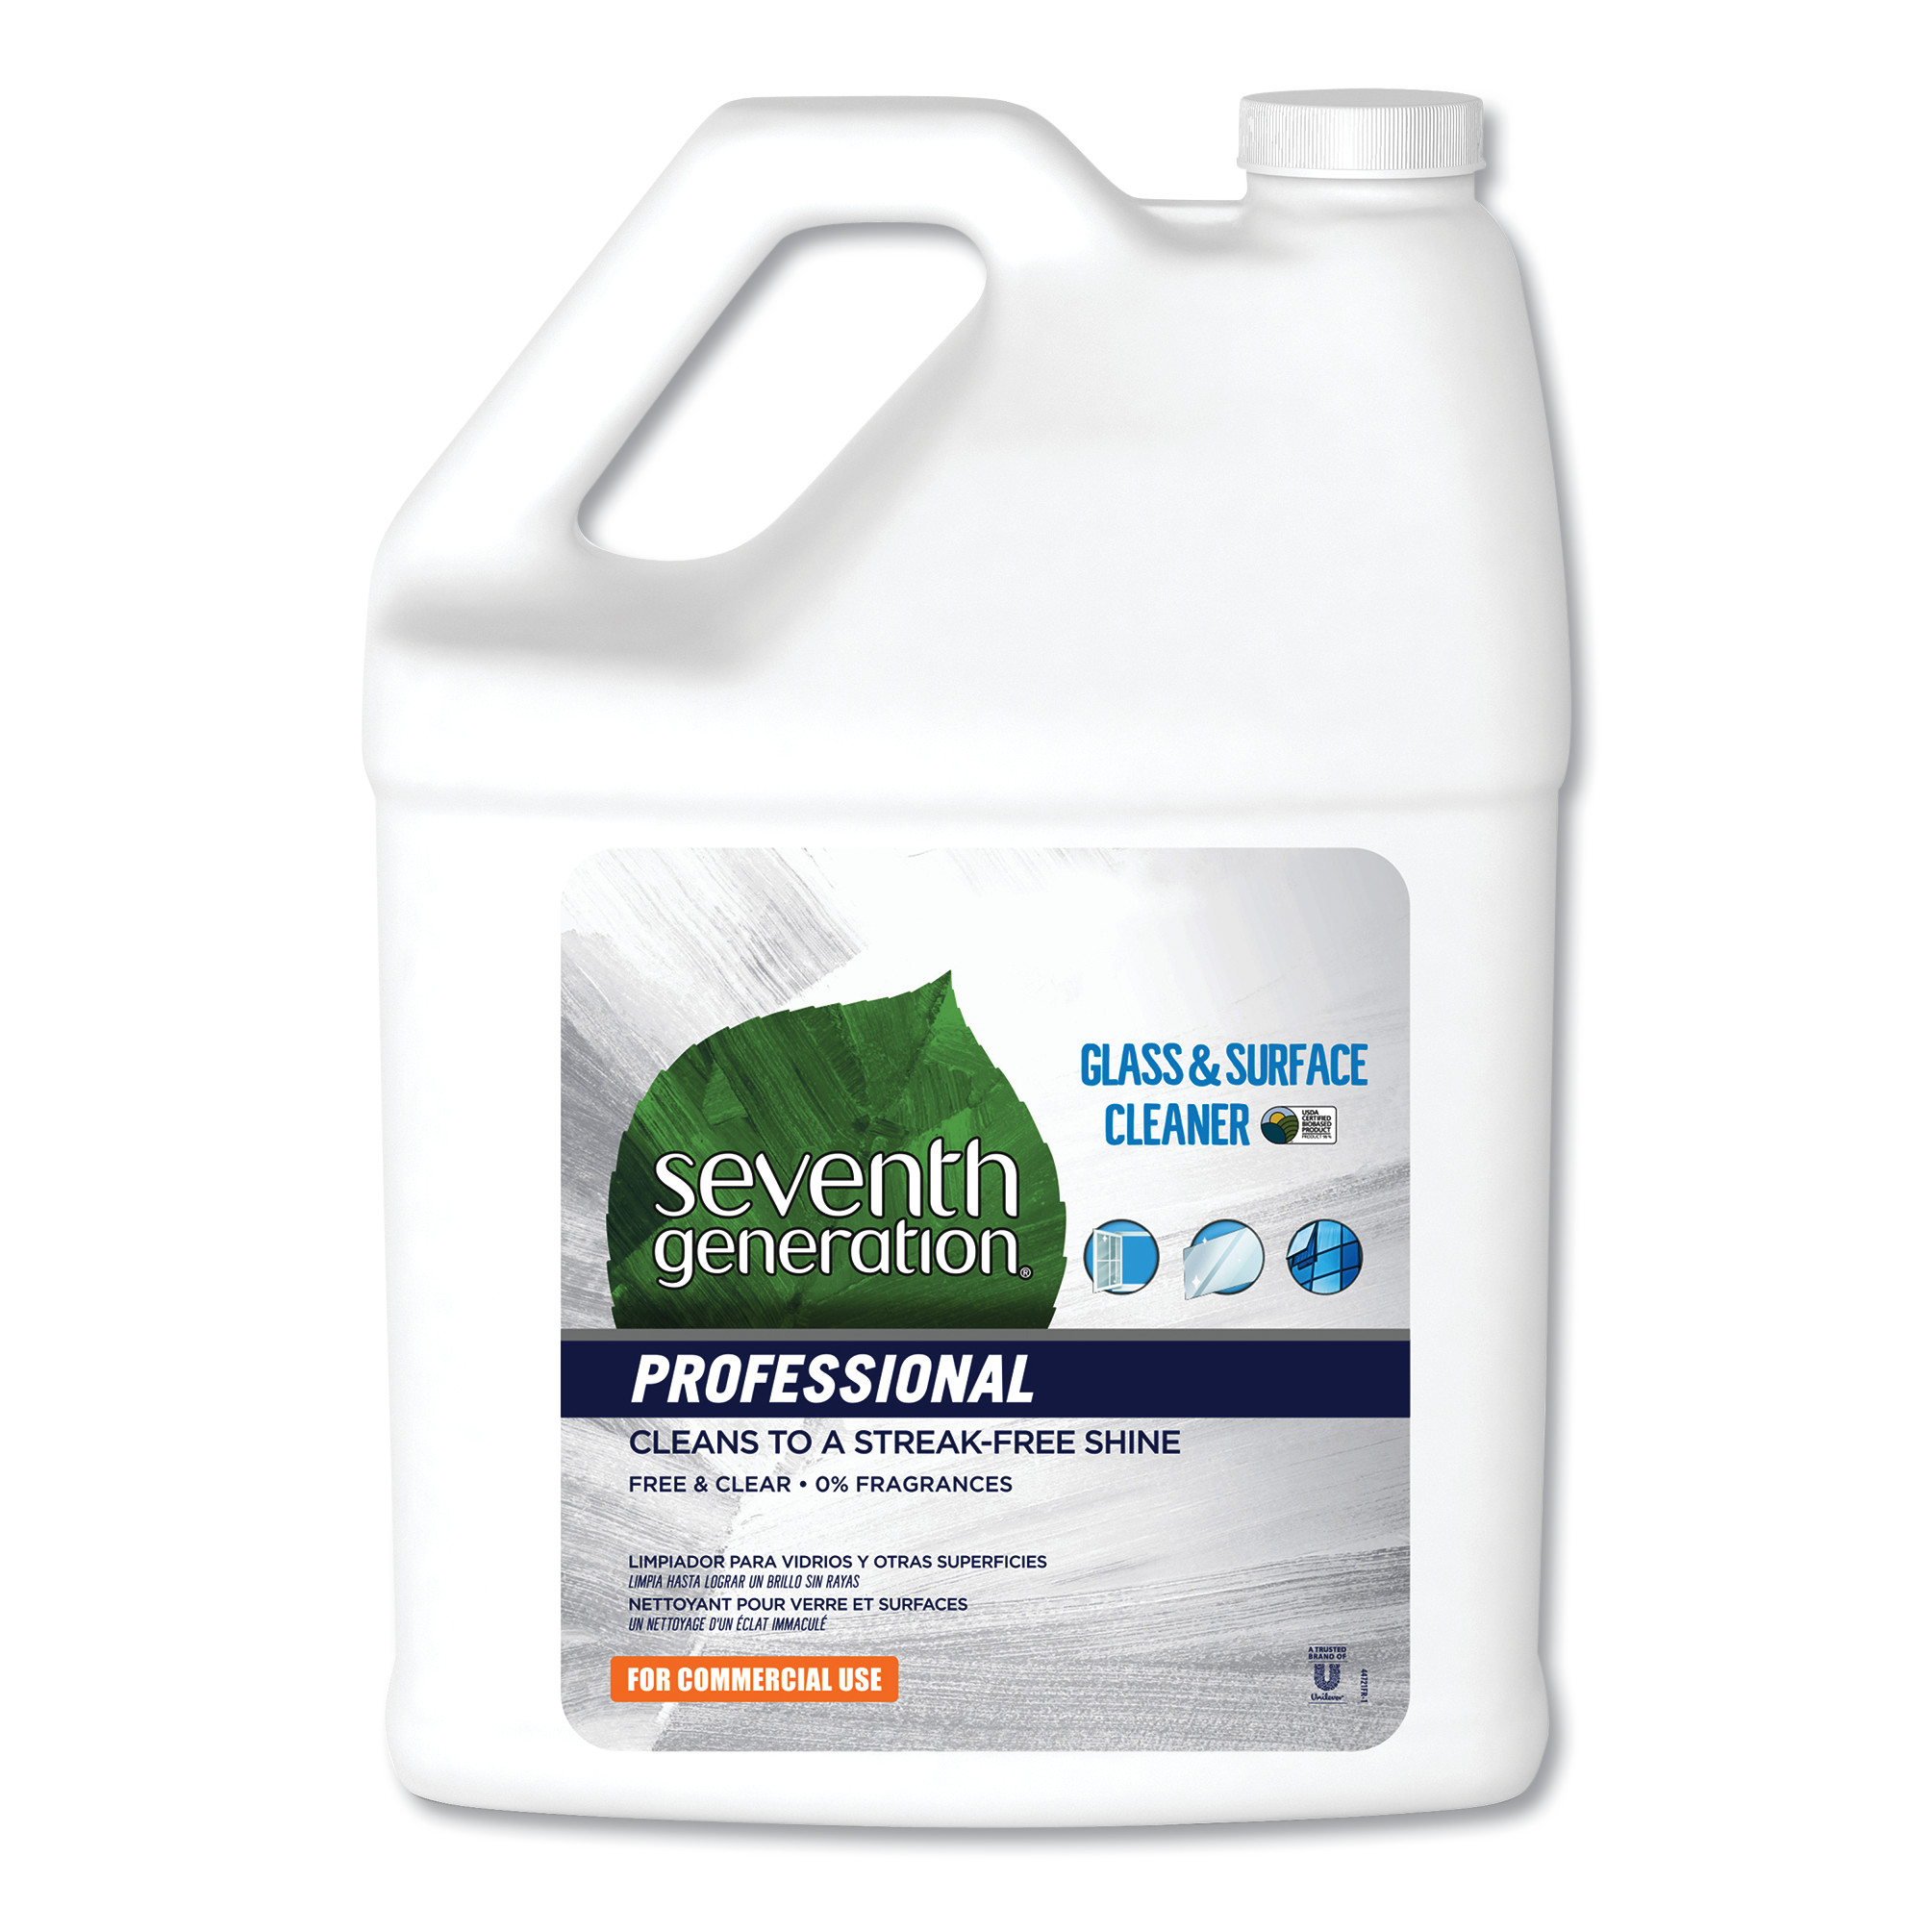  Seventh Generation Professional 44721CT Glass and Surface Cleaner, Free and Clear, 1 gal Bottle, 2/Carton (SEV44721CT) 